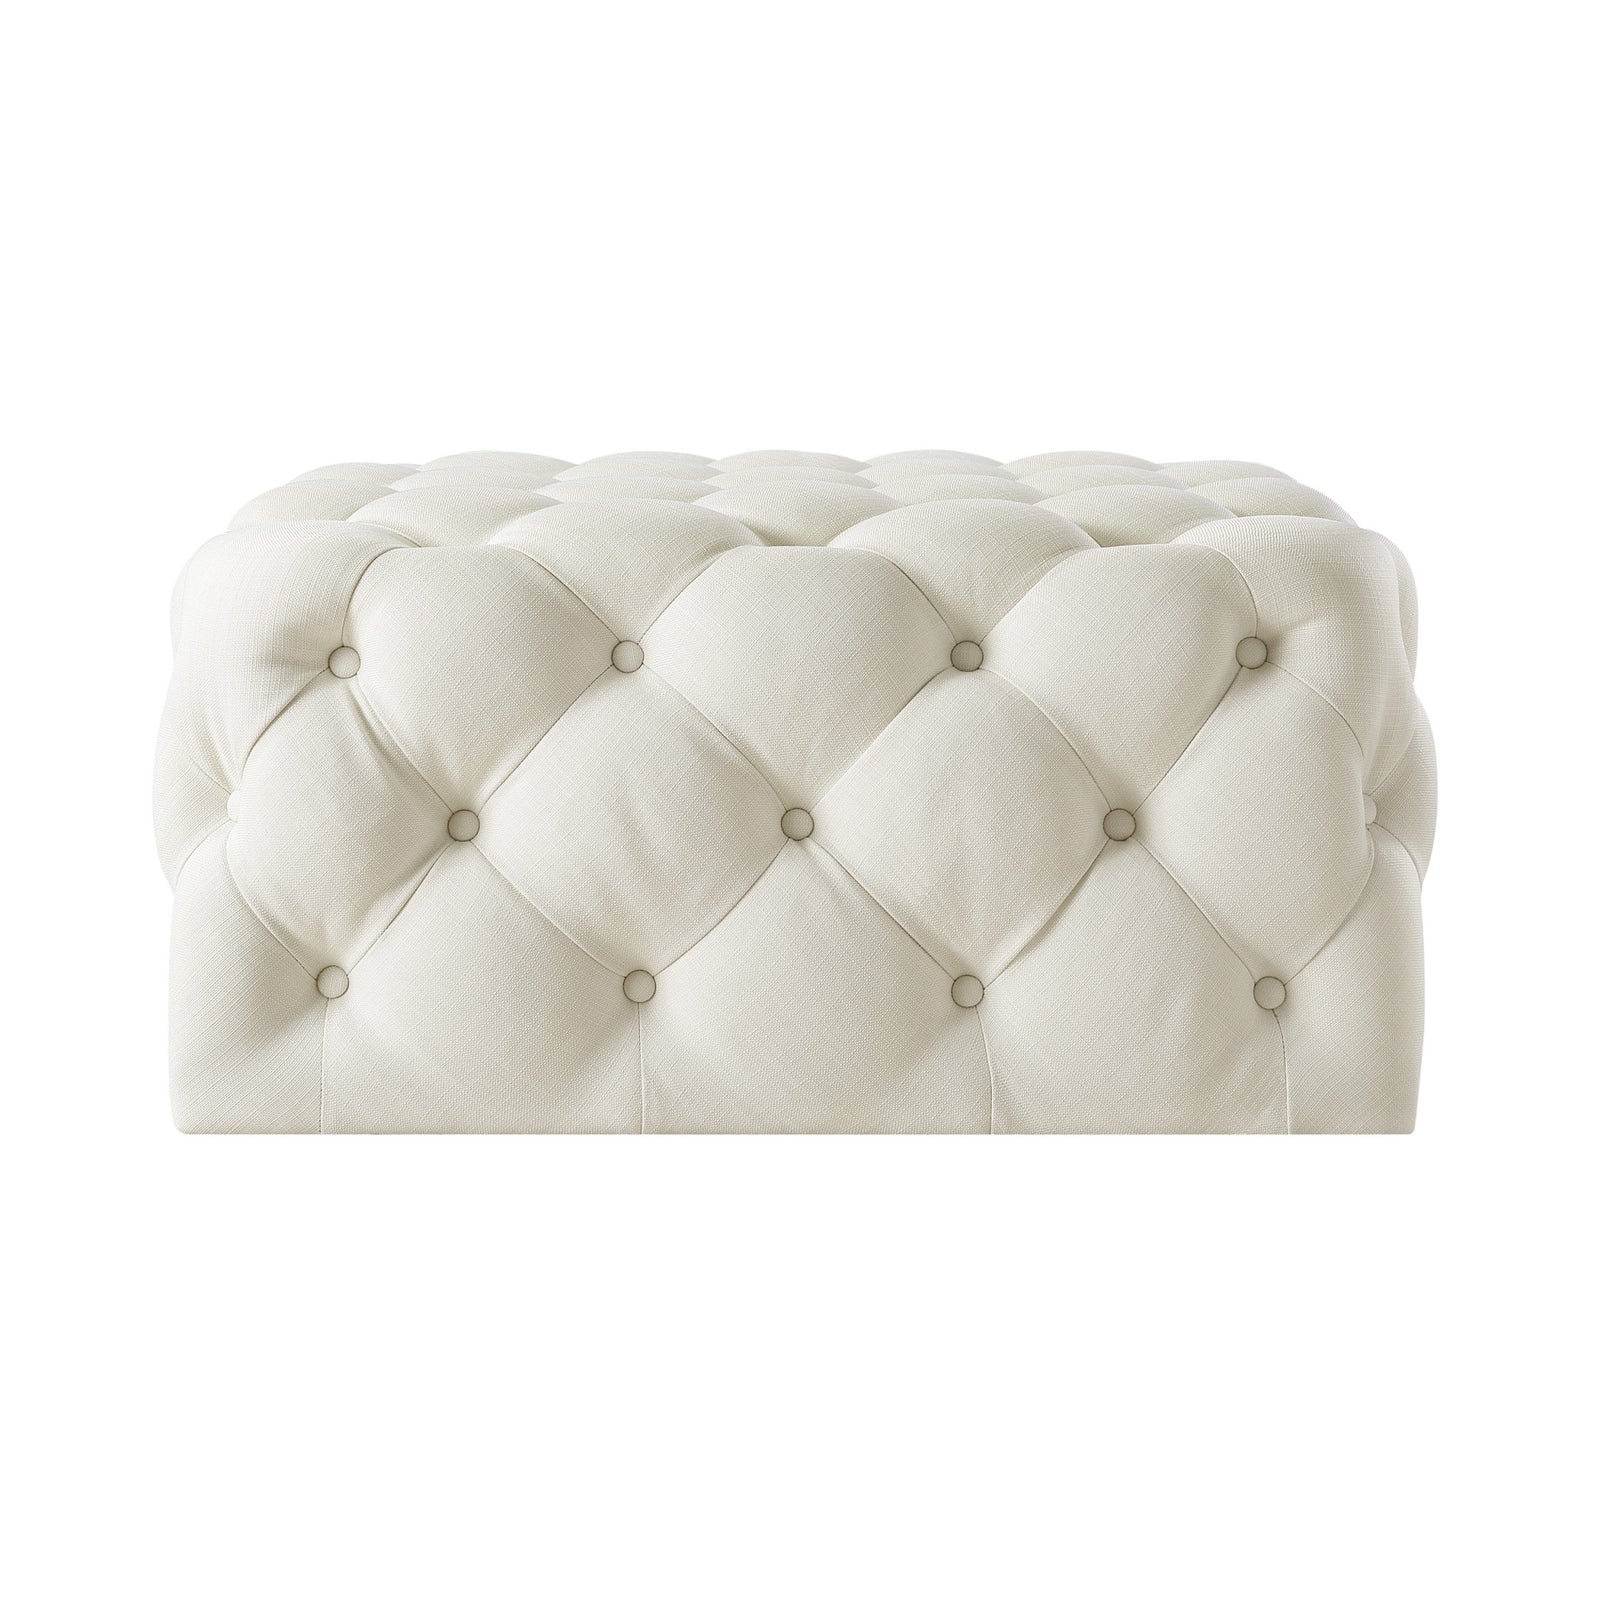 Cream White 100% Linen With Black Tufted Cocktail Ottoman 33"